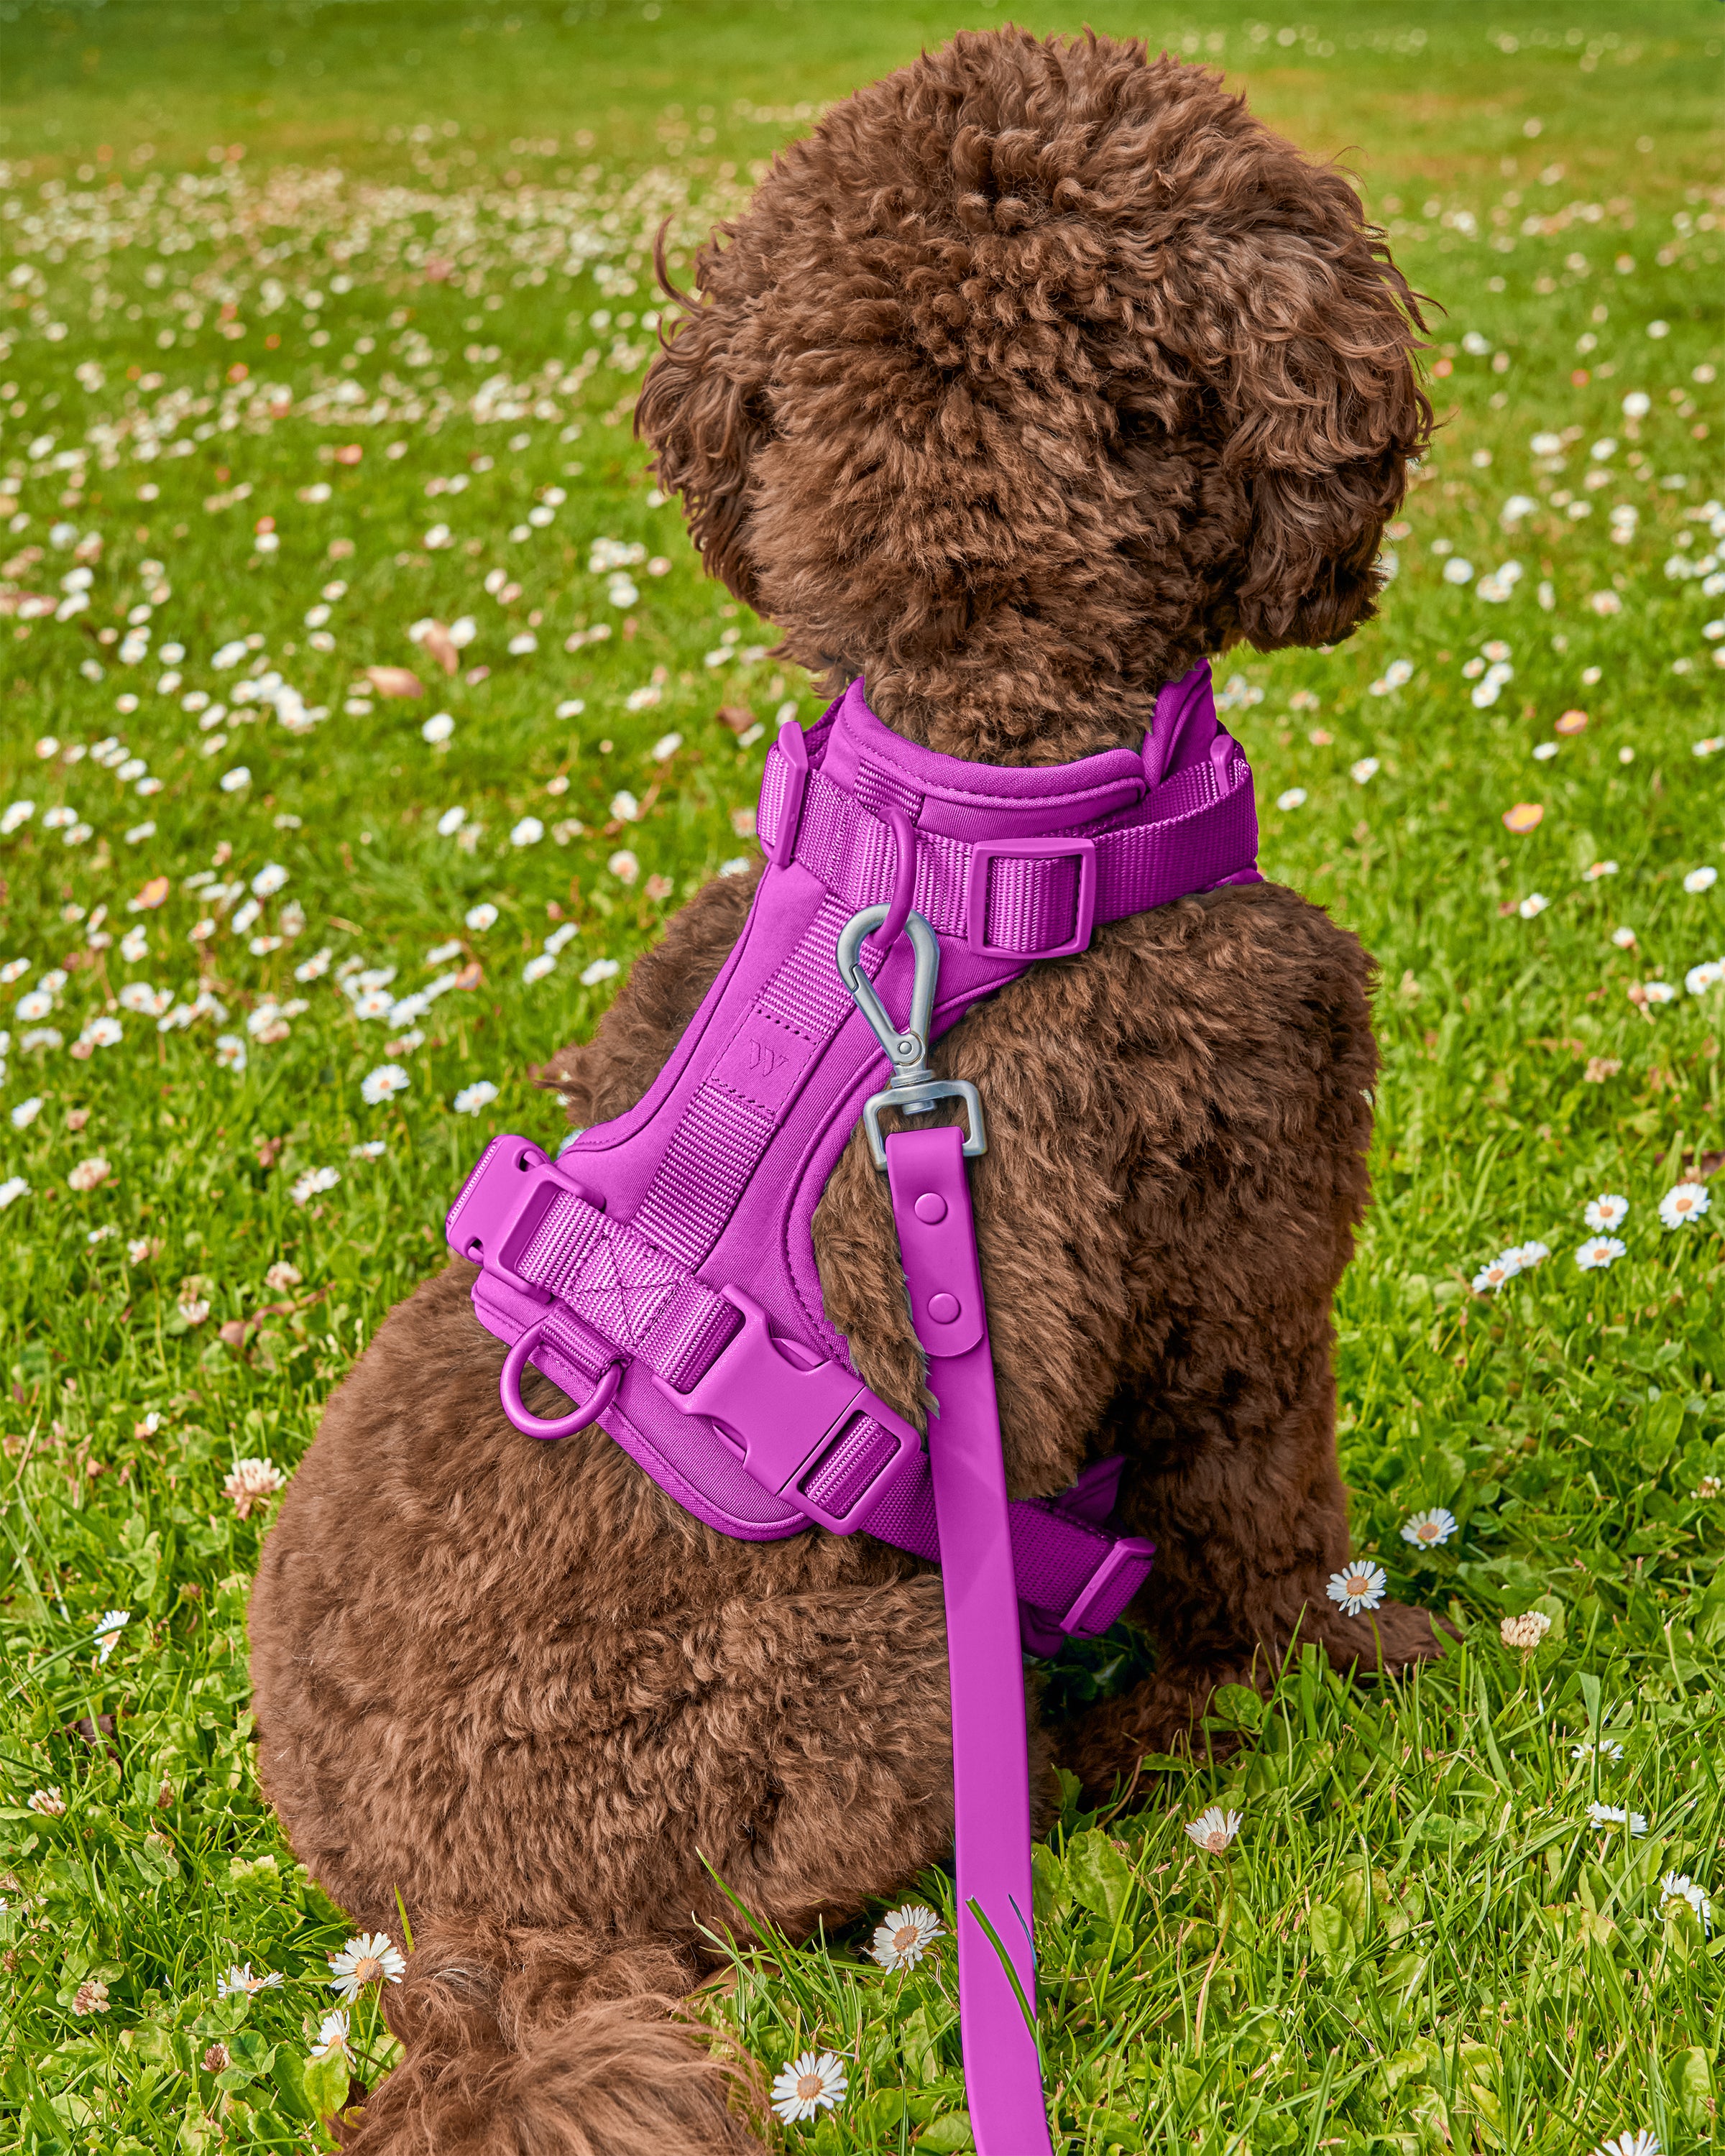 Purple Puppy dog toy with walking leash!